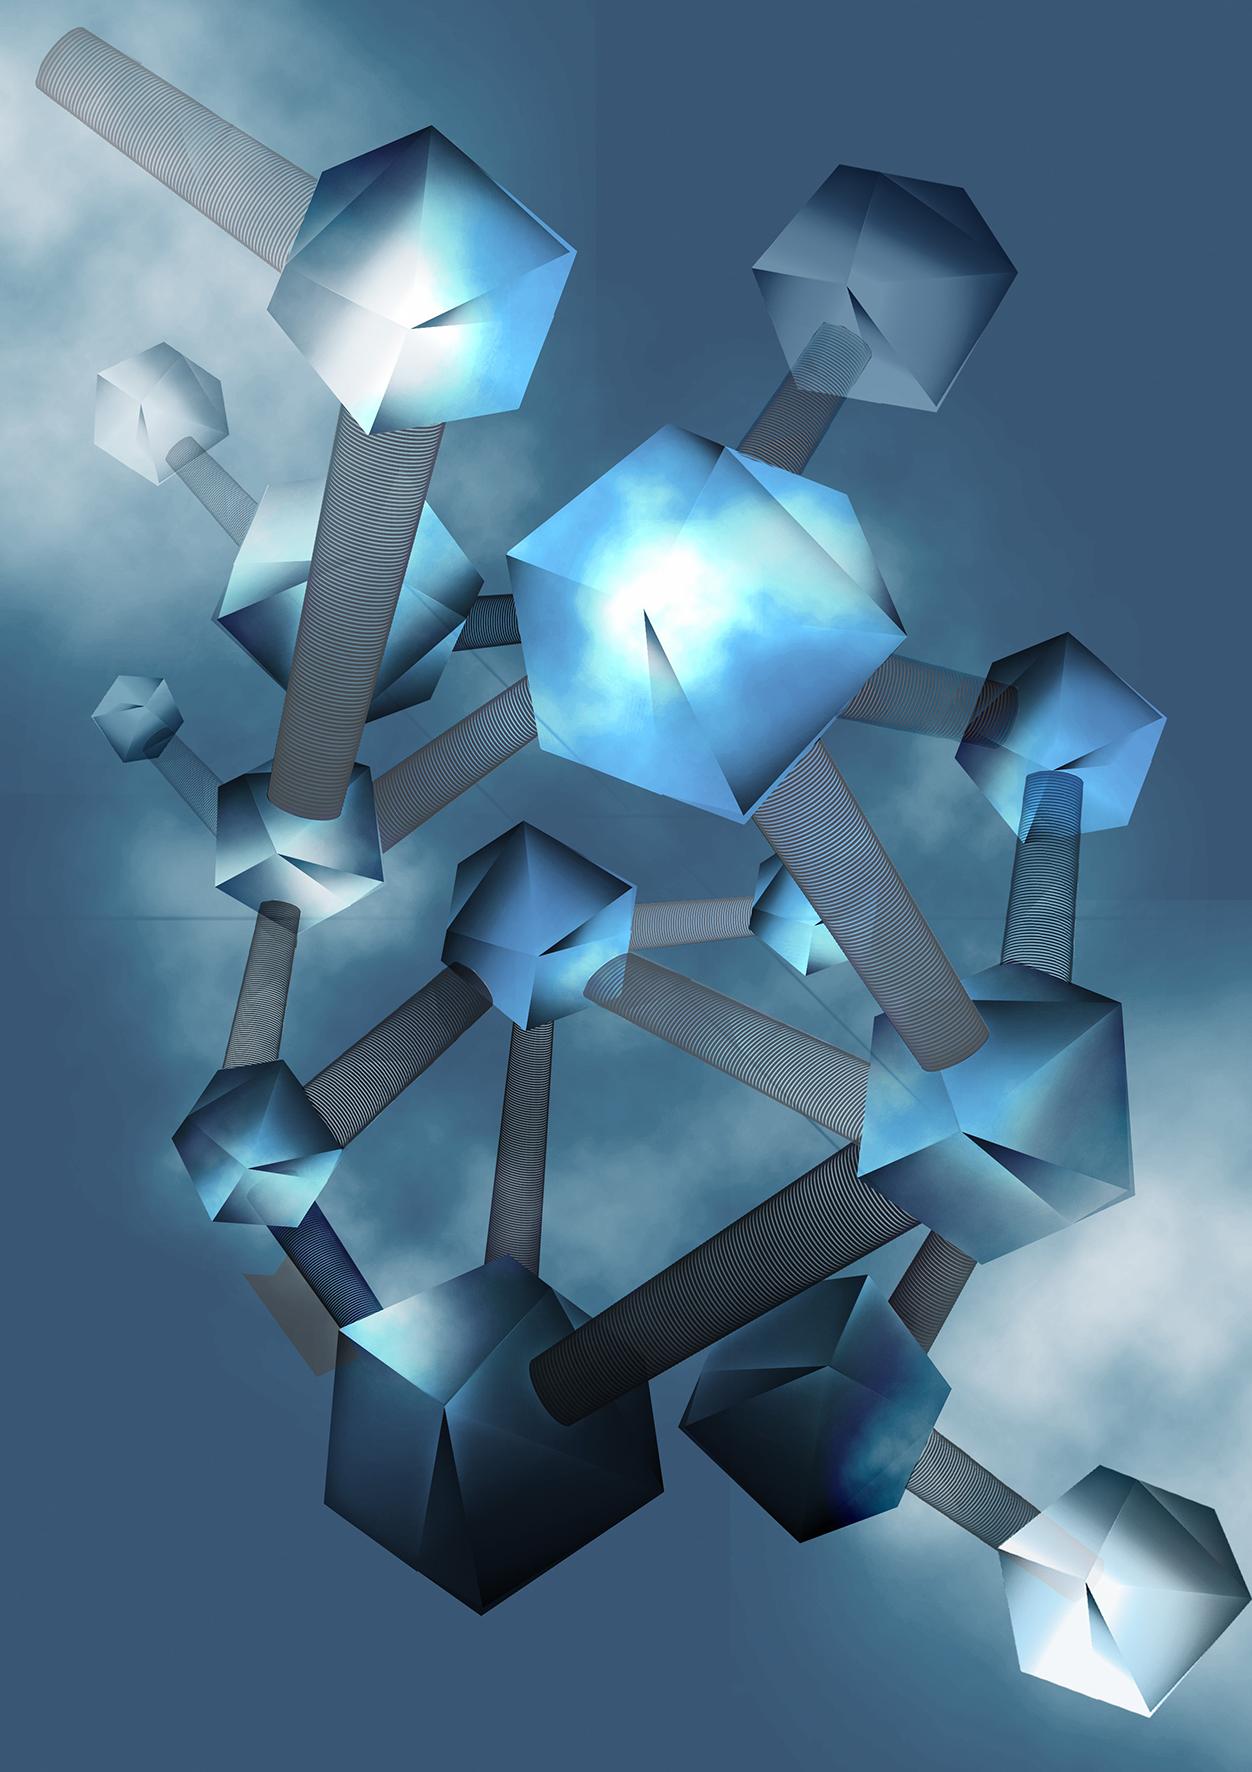 a digital image with several large blue shapes